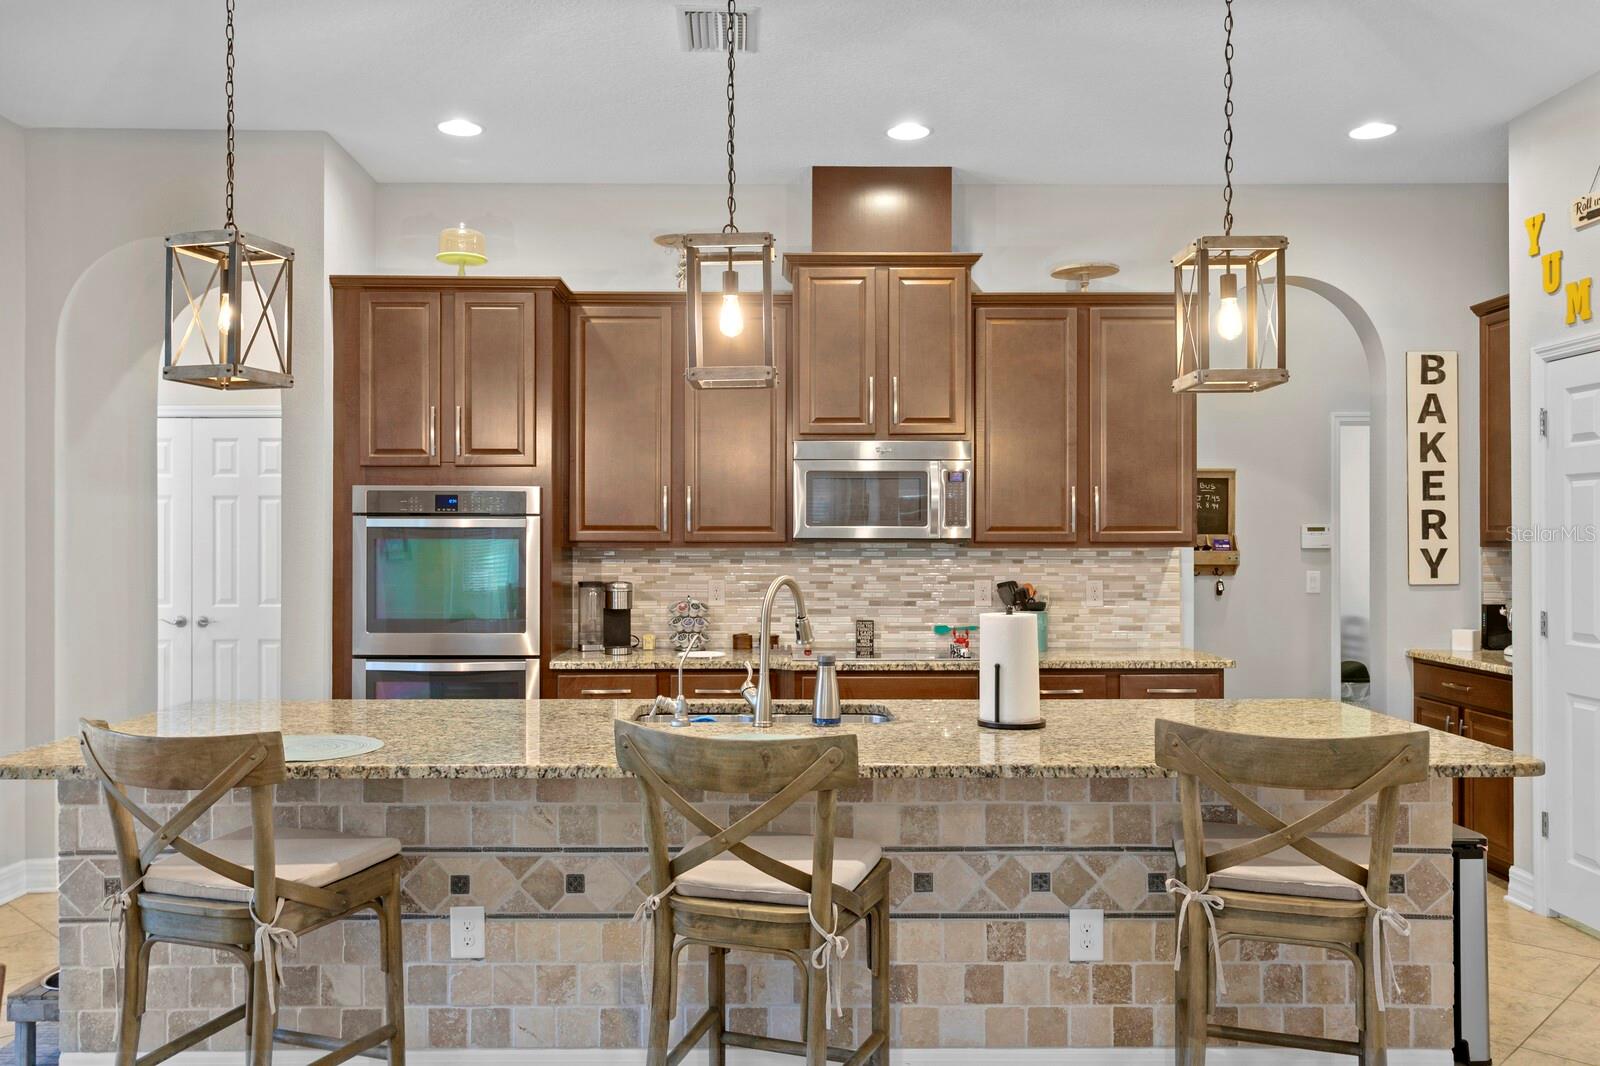 Kitchen features walk in pantry, 42" cabintry, pendant lighting, island, and double all oven.